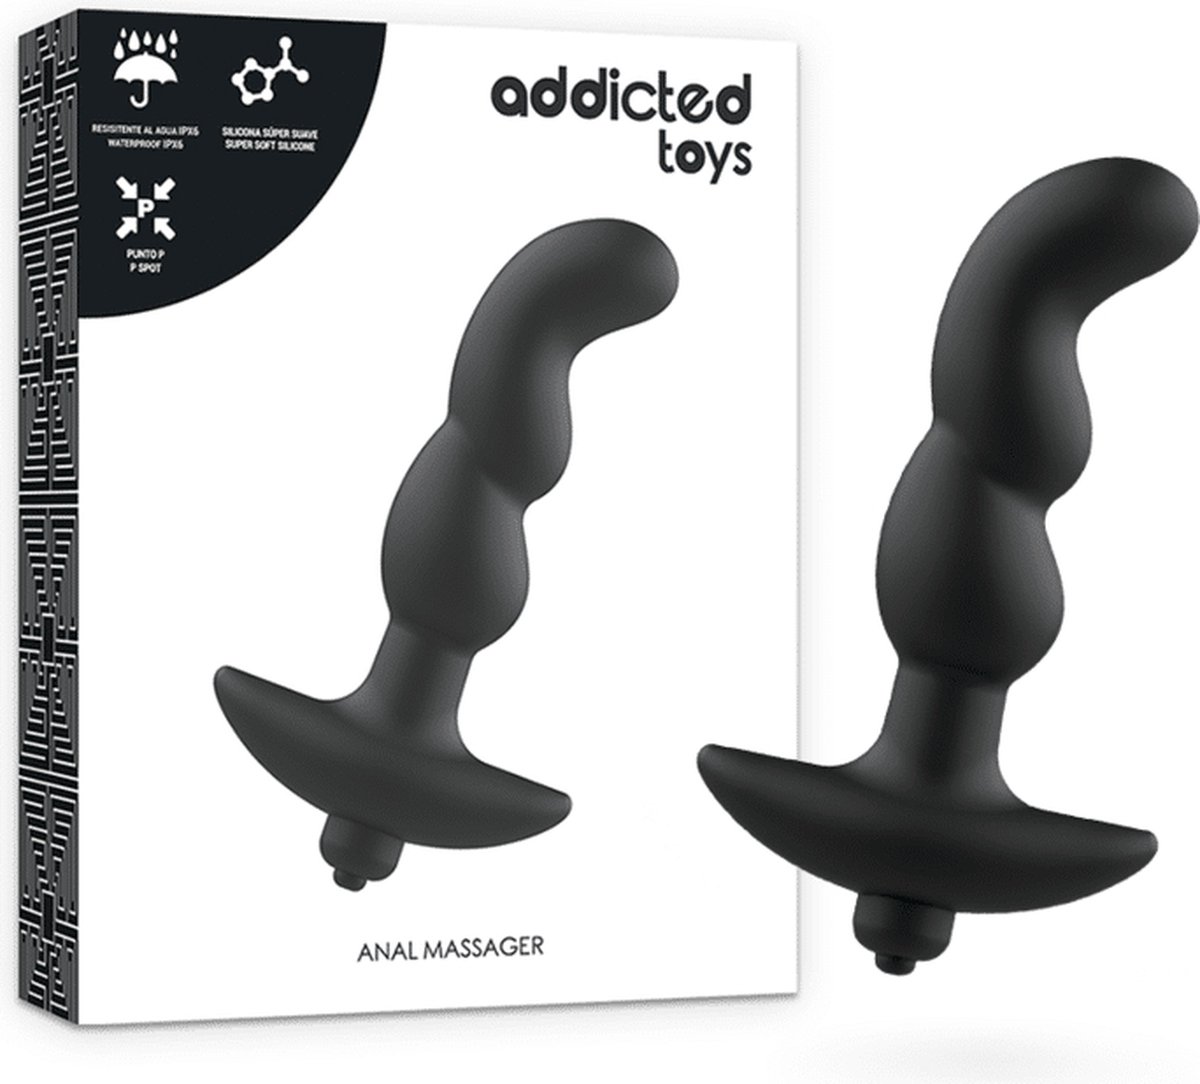 ADDICTED TOYS | Addicted Toys Anal Massager With Vibration Black | Prostate Massager | Anal Vibrator | Vibrator | Sex Toy for Man | Sex Toy for Couple